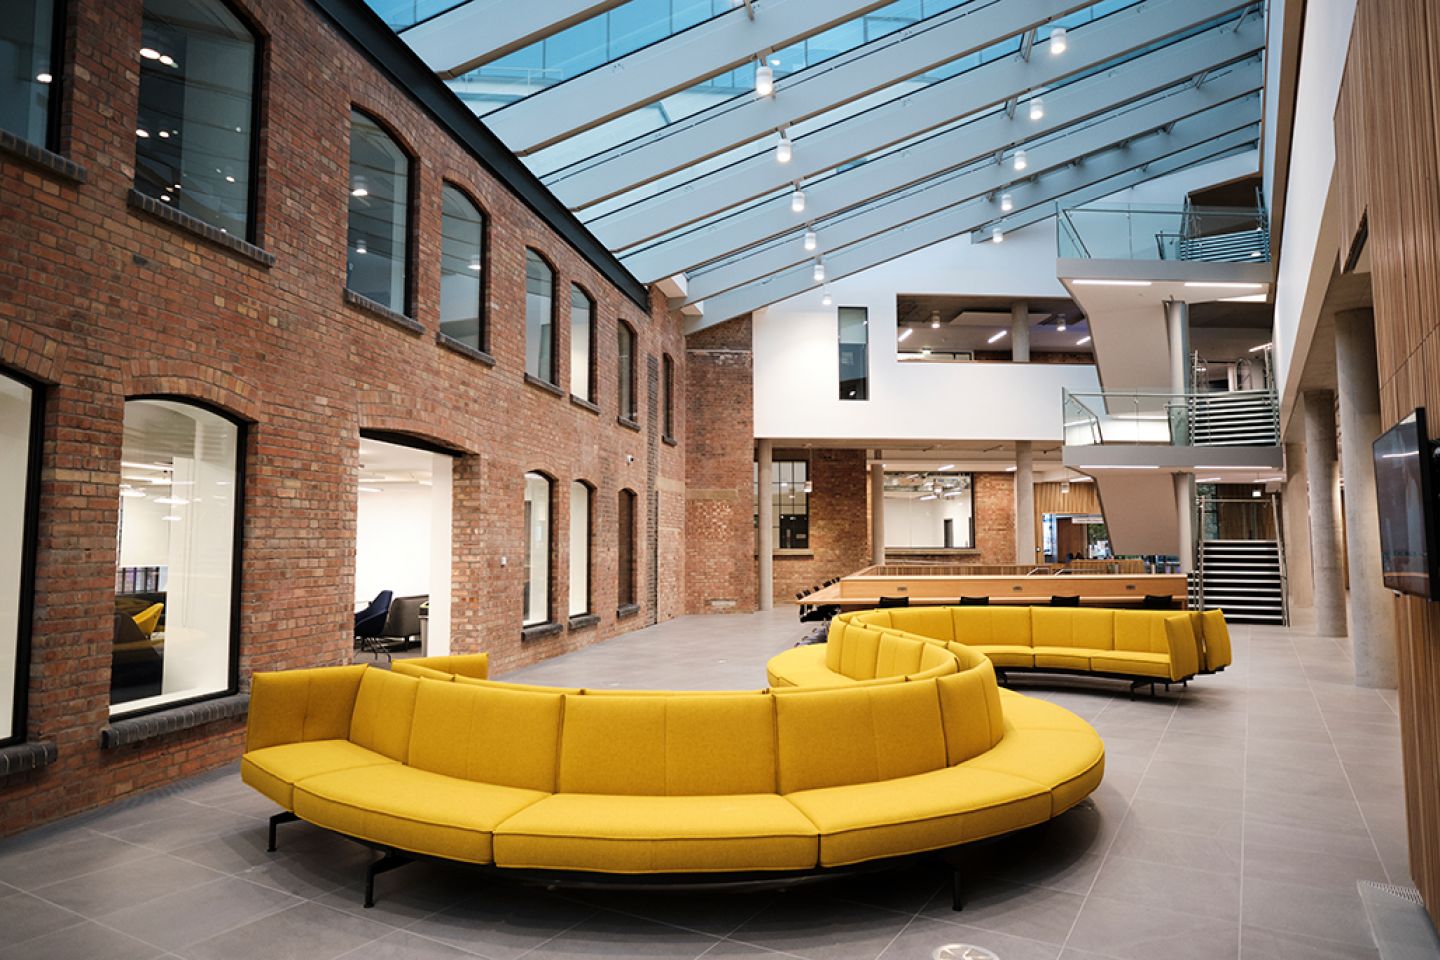 Interior of The City Law School with curved yellow sofa by staircase